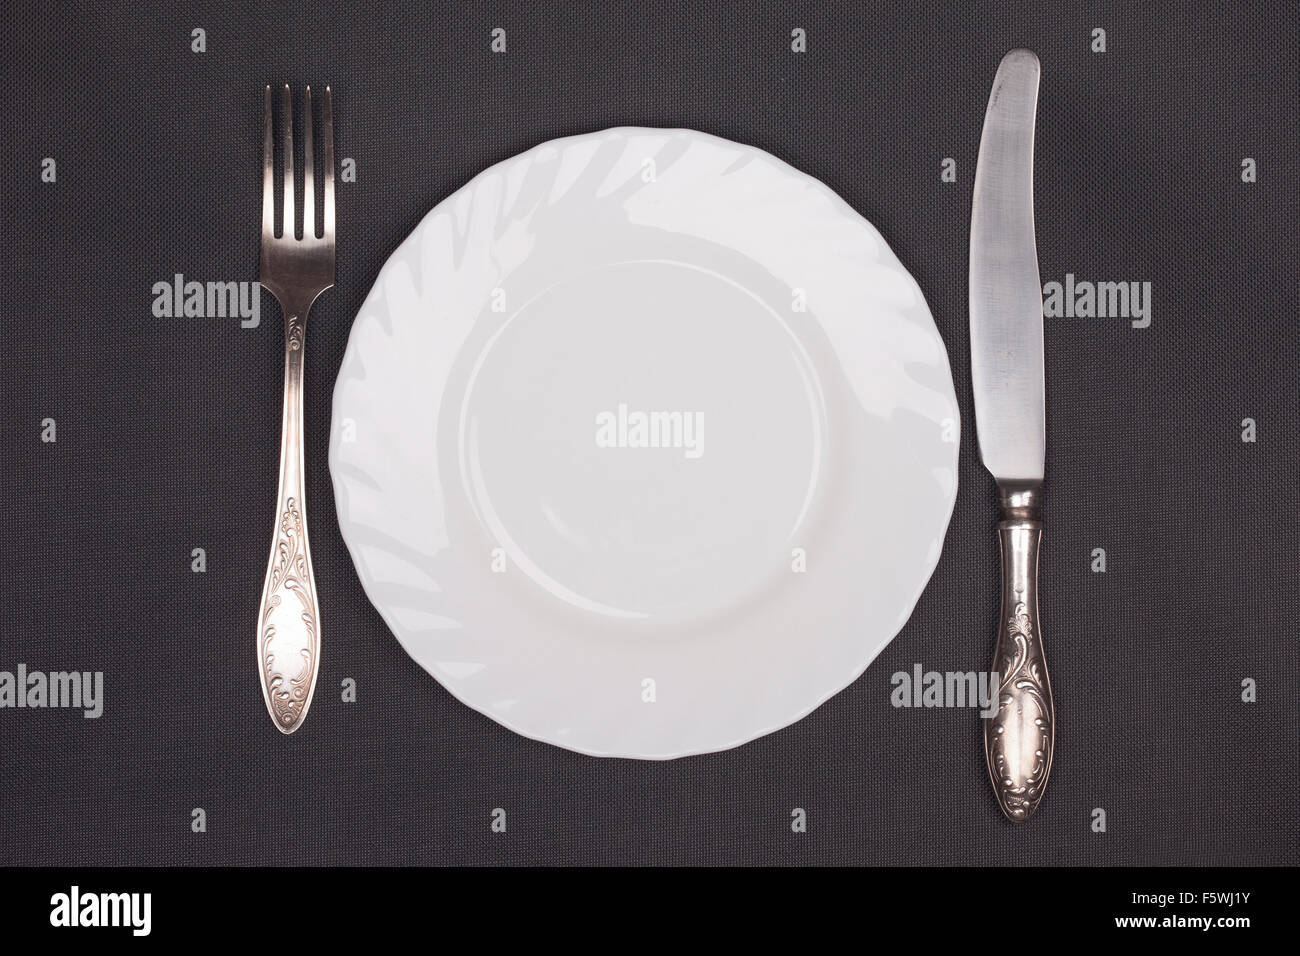 Plate, fork and knife top view on black cloth background Stock Photo